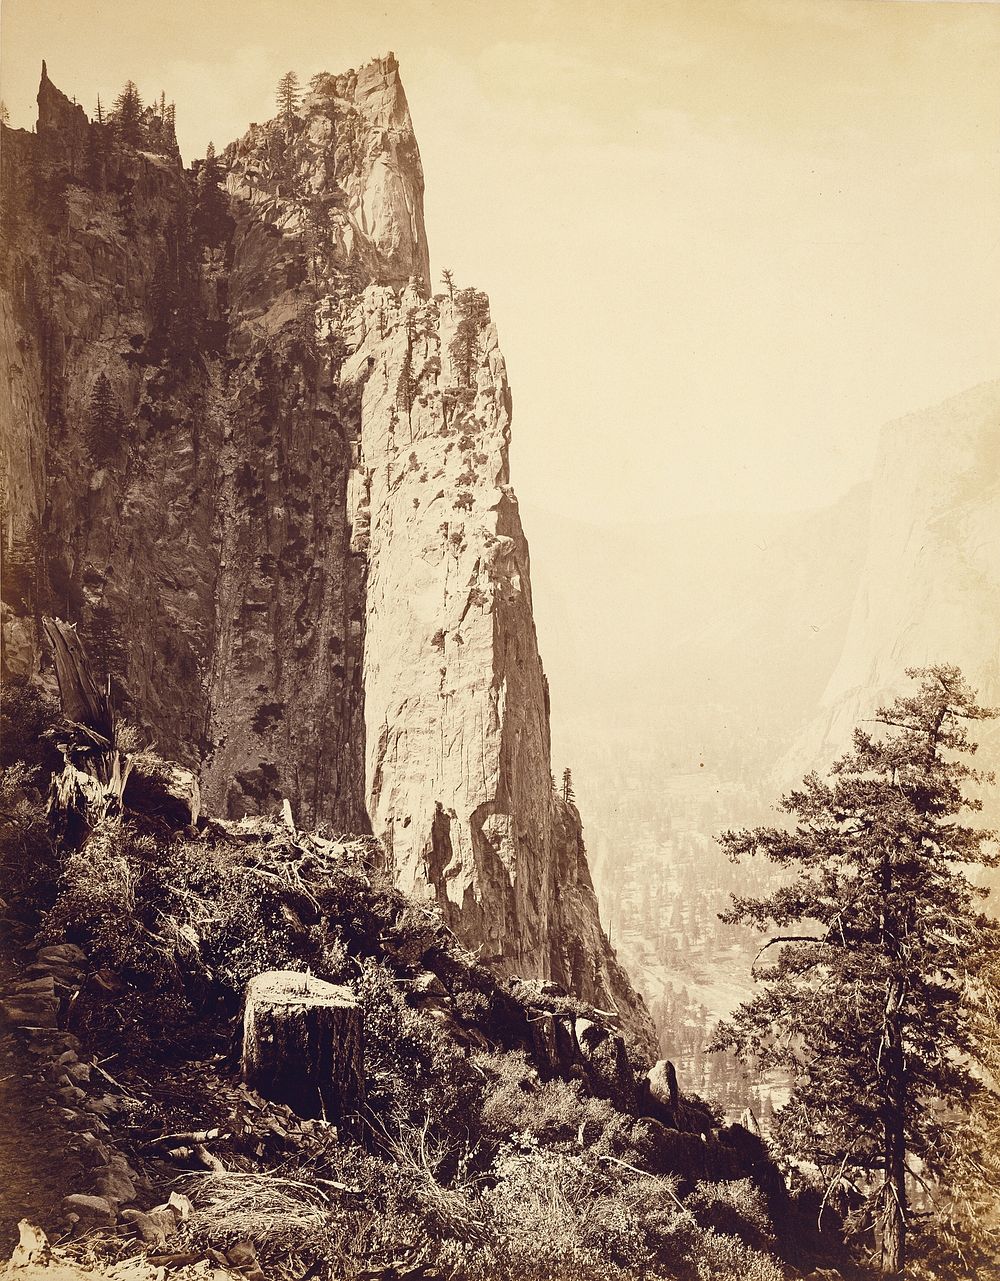 Sentinel Rock, 3270 ft., From near Union Point. Yo-Semite Valley. by Thomas Houseworth and Company, Carleton Watkins, C L…